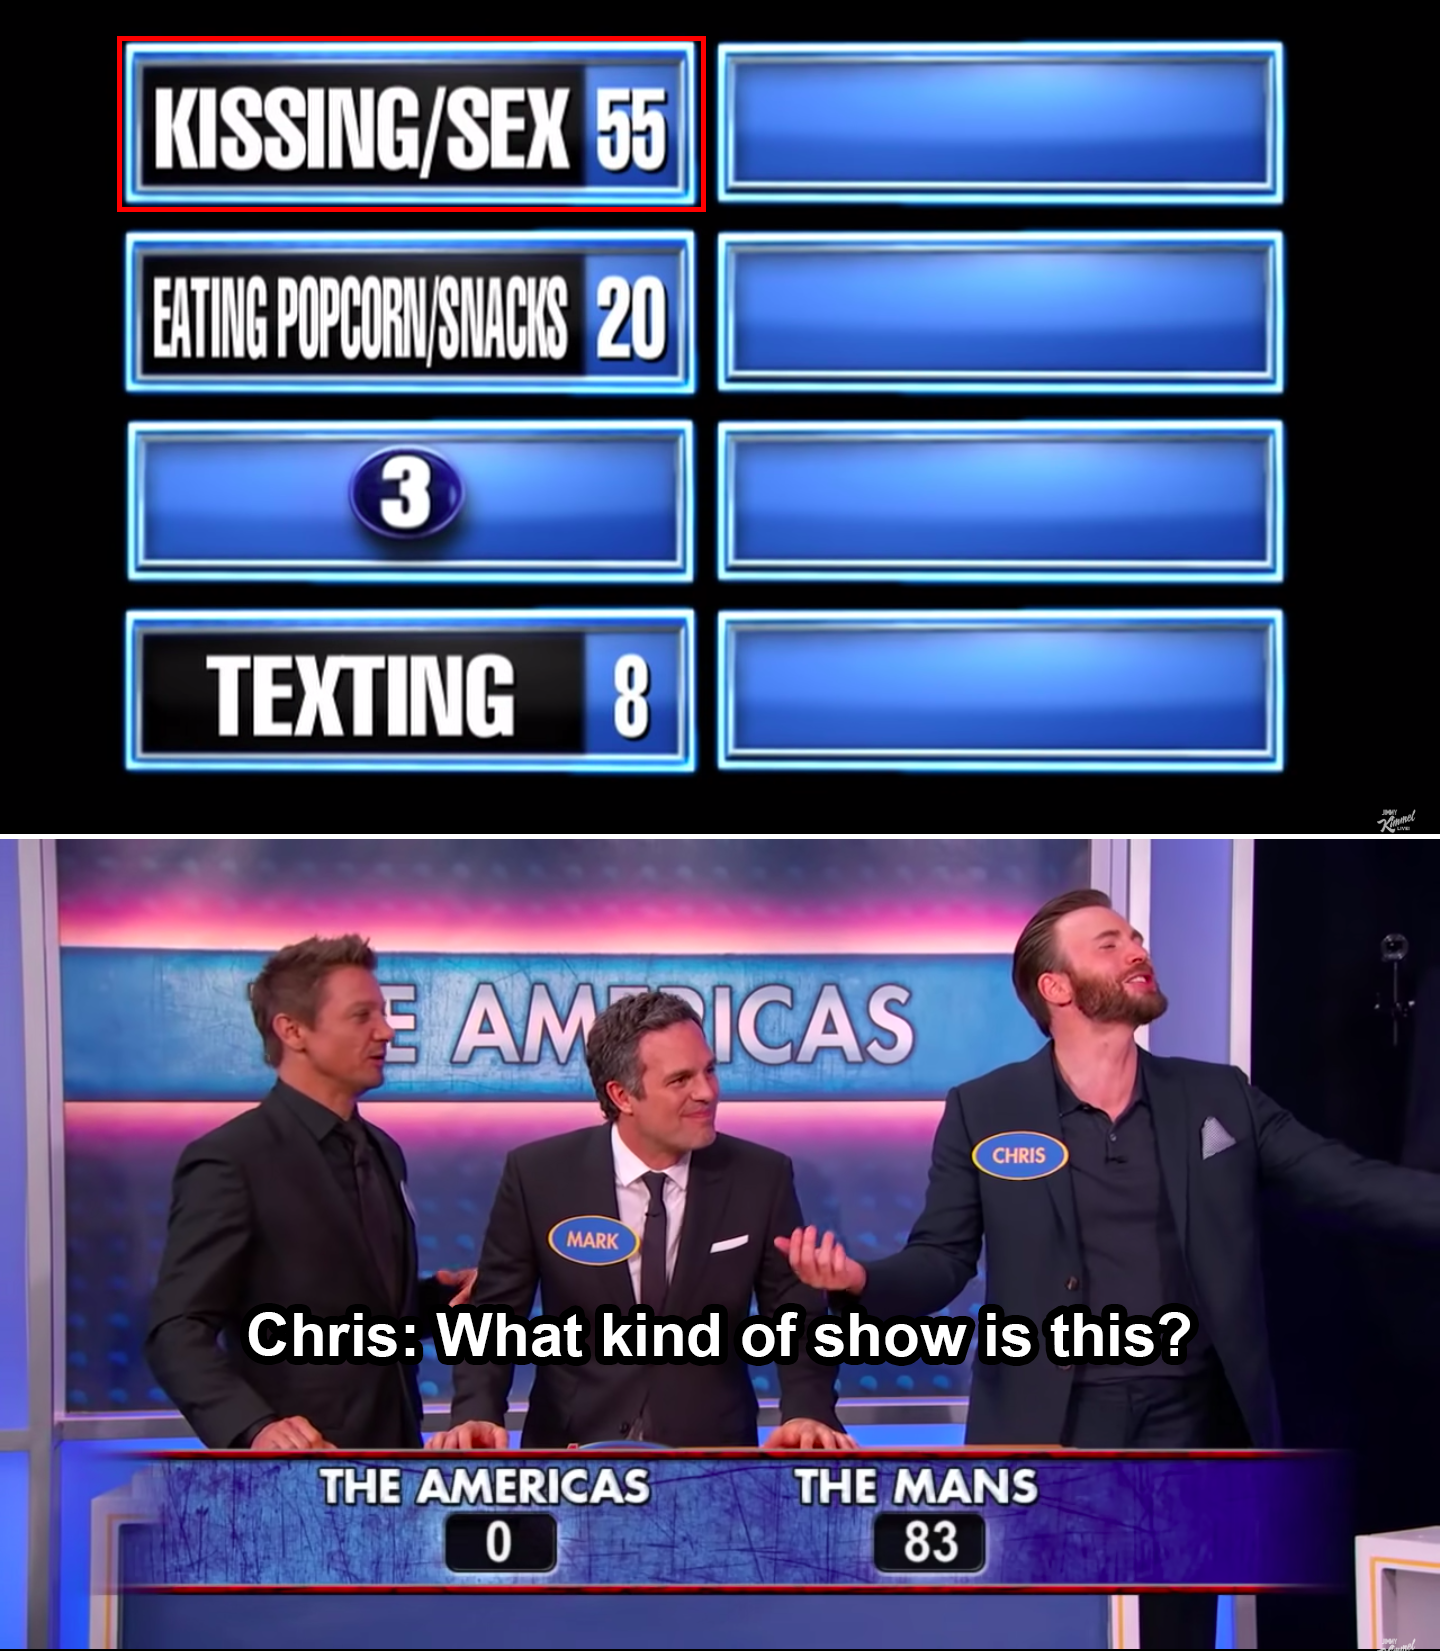 Chris Evans saying, &quot;What kind of show is this?&quot; to the answer &quot;Kissing/Sex&quot;